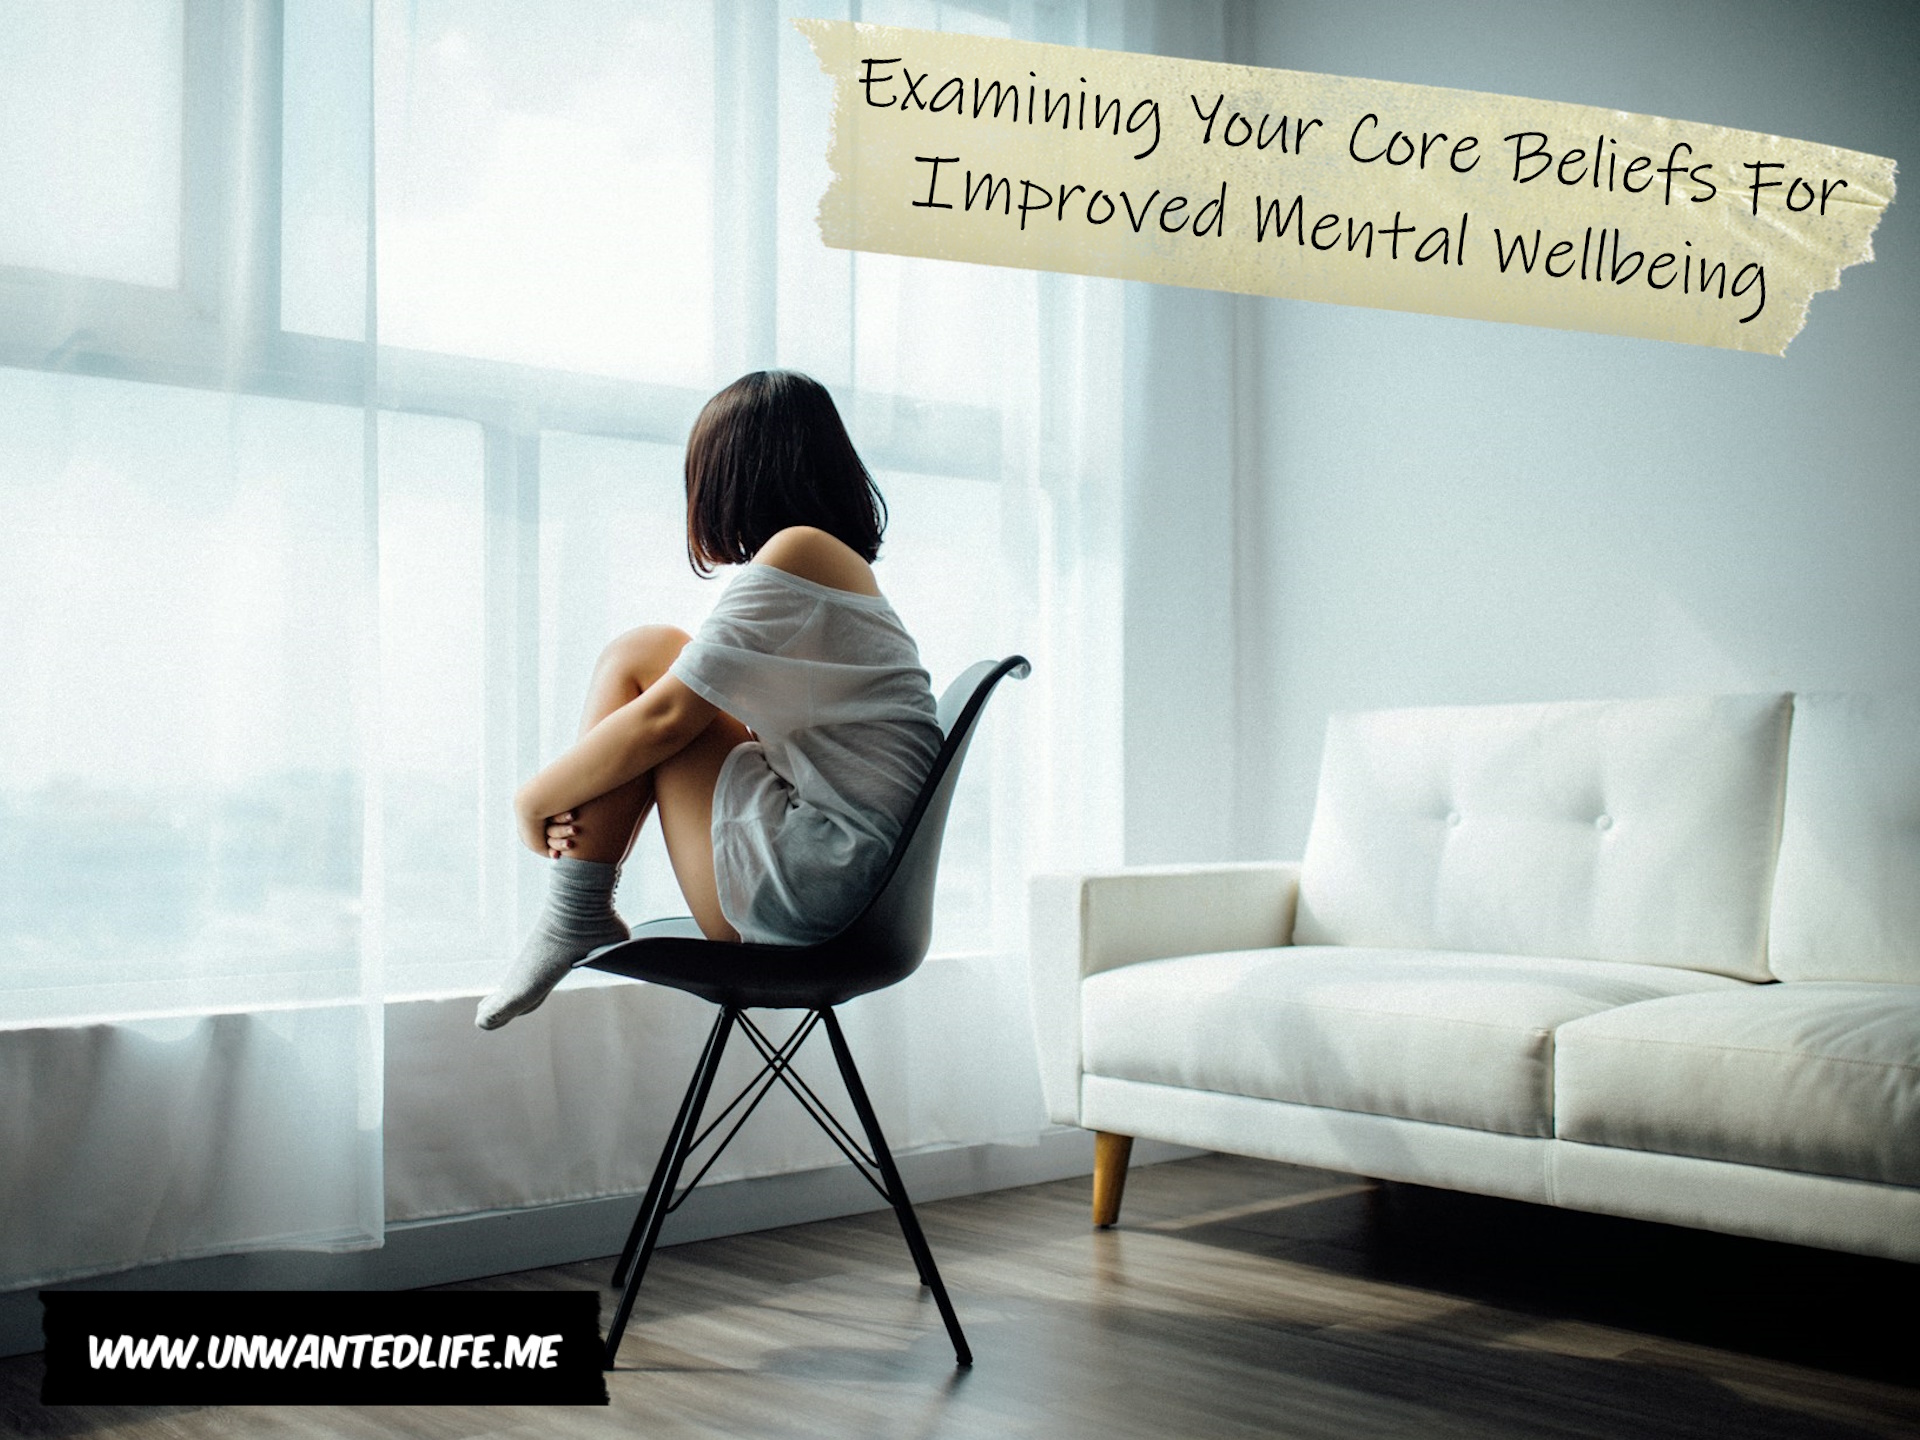 A photo of a woman sitting on a chair looking out of the window, comforting themselves, to represent the topic of the article - Examining Your Core Beliefs For Improved Mental Wellbeing